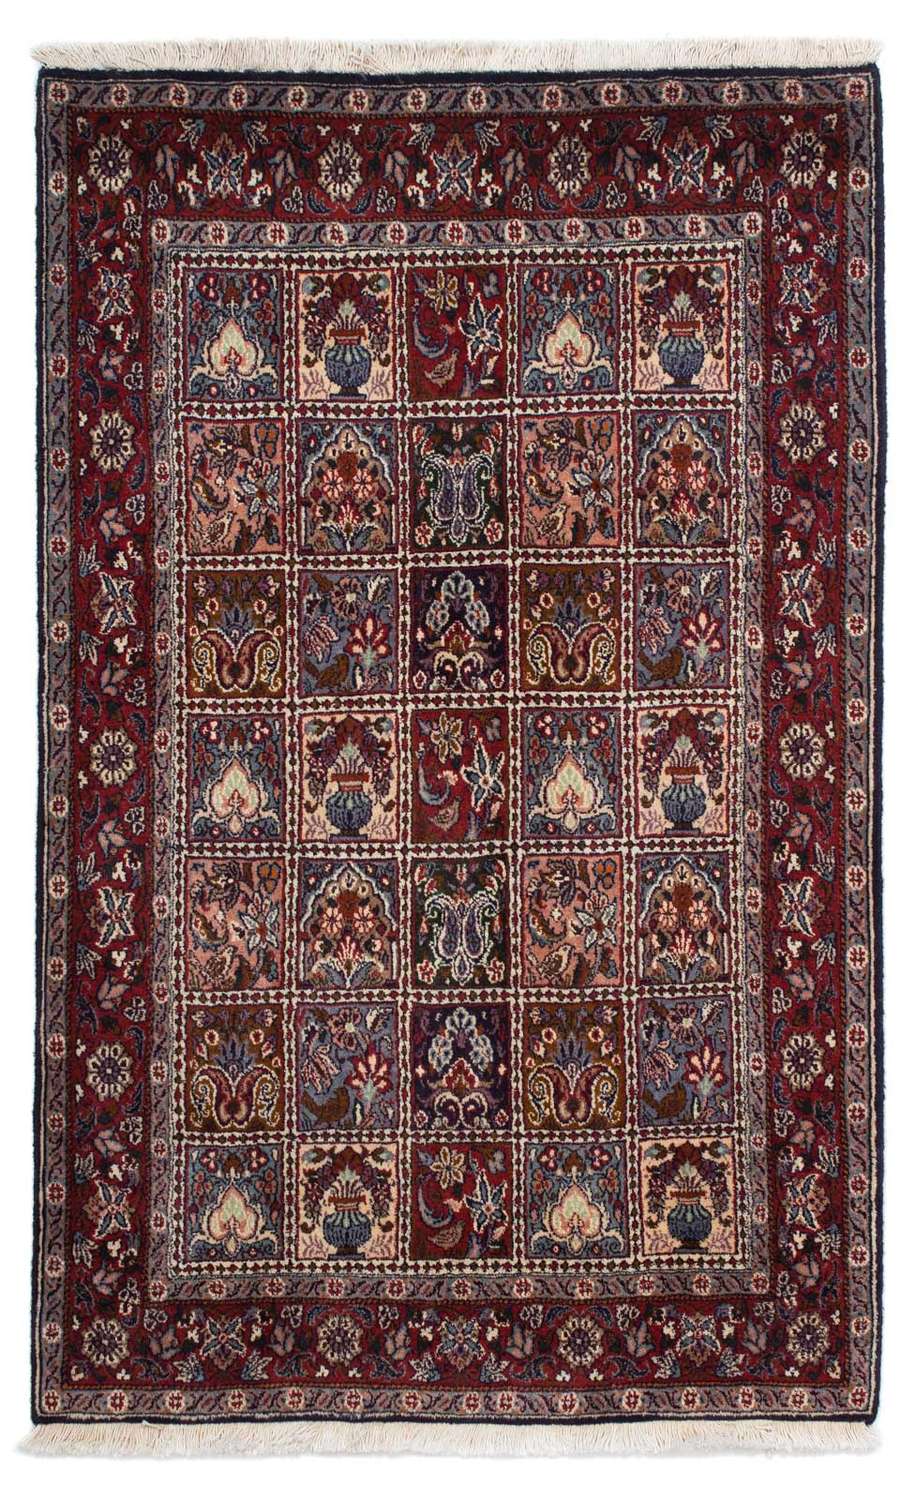 Perser Rug - Classic - 154 x 100 cm - brown